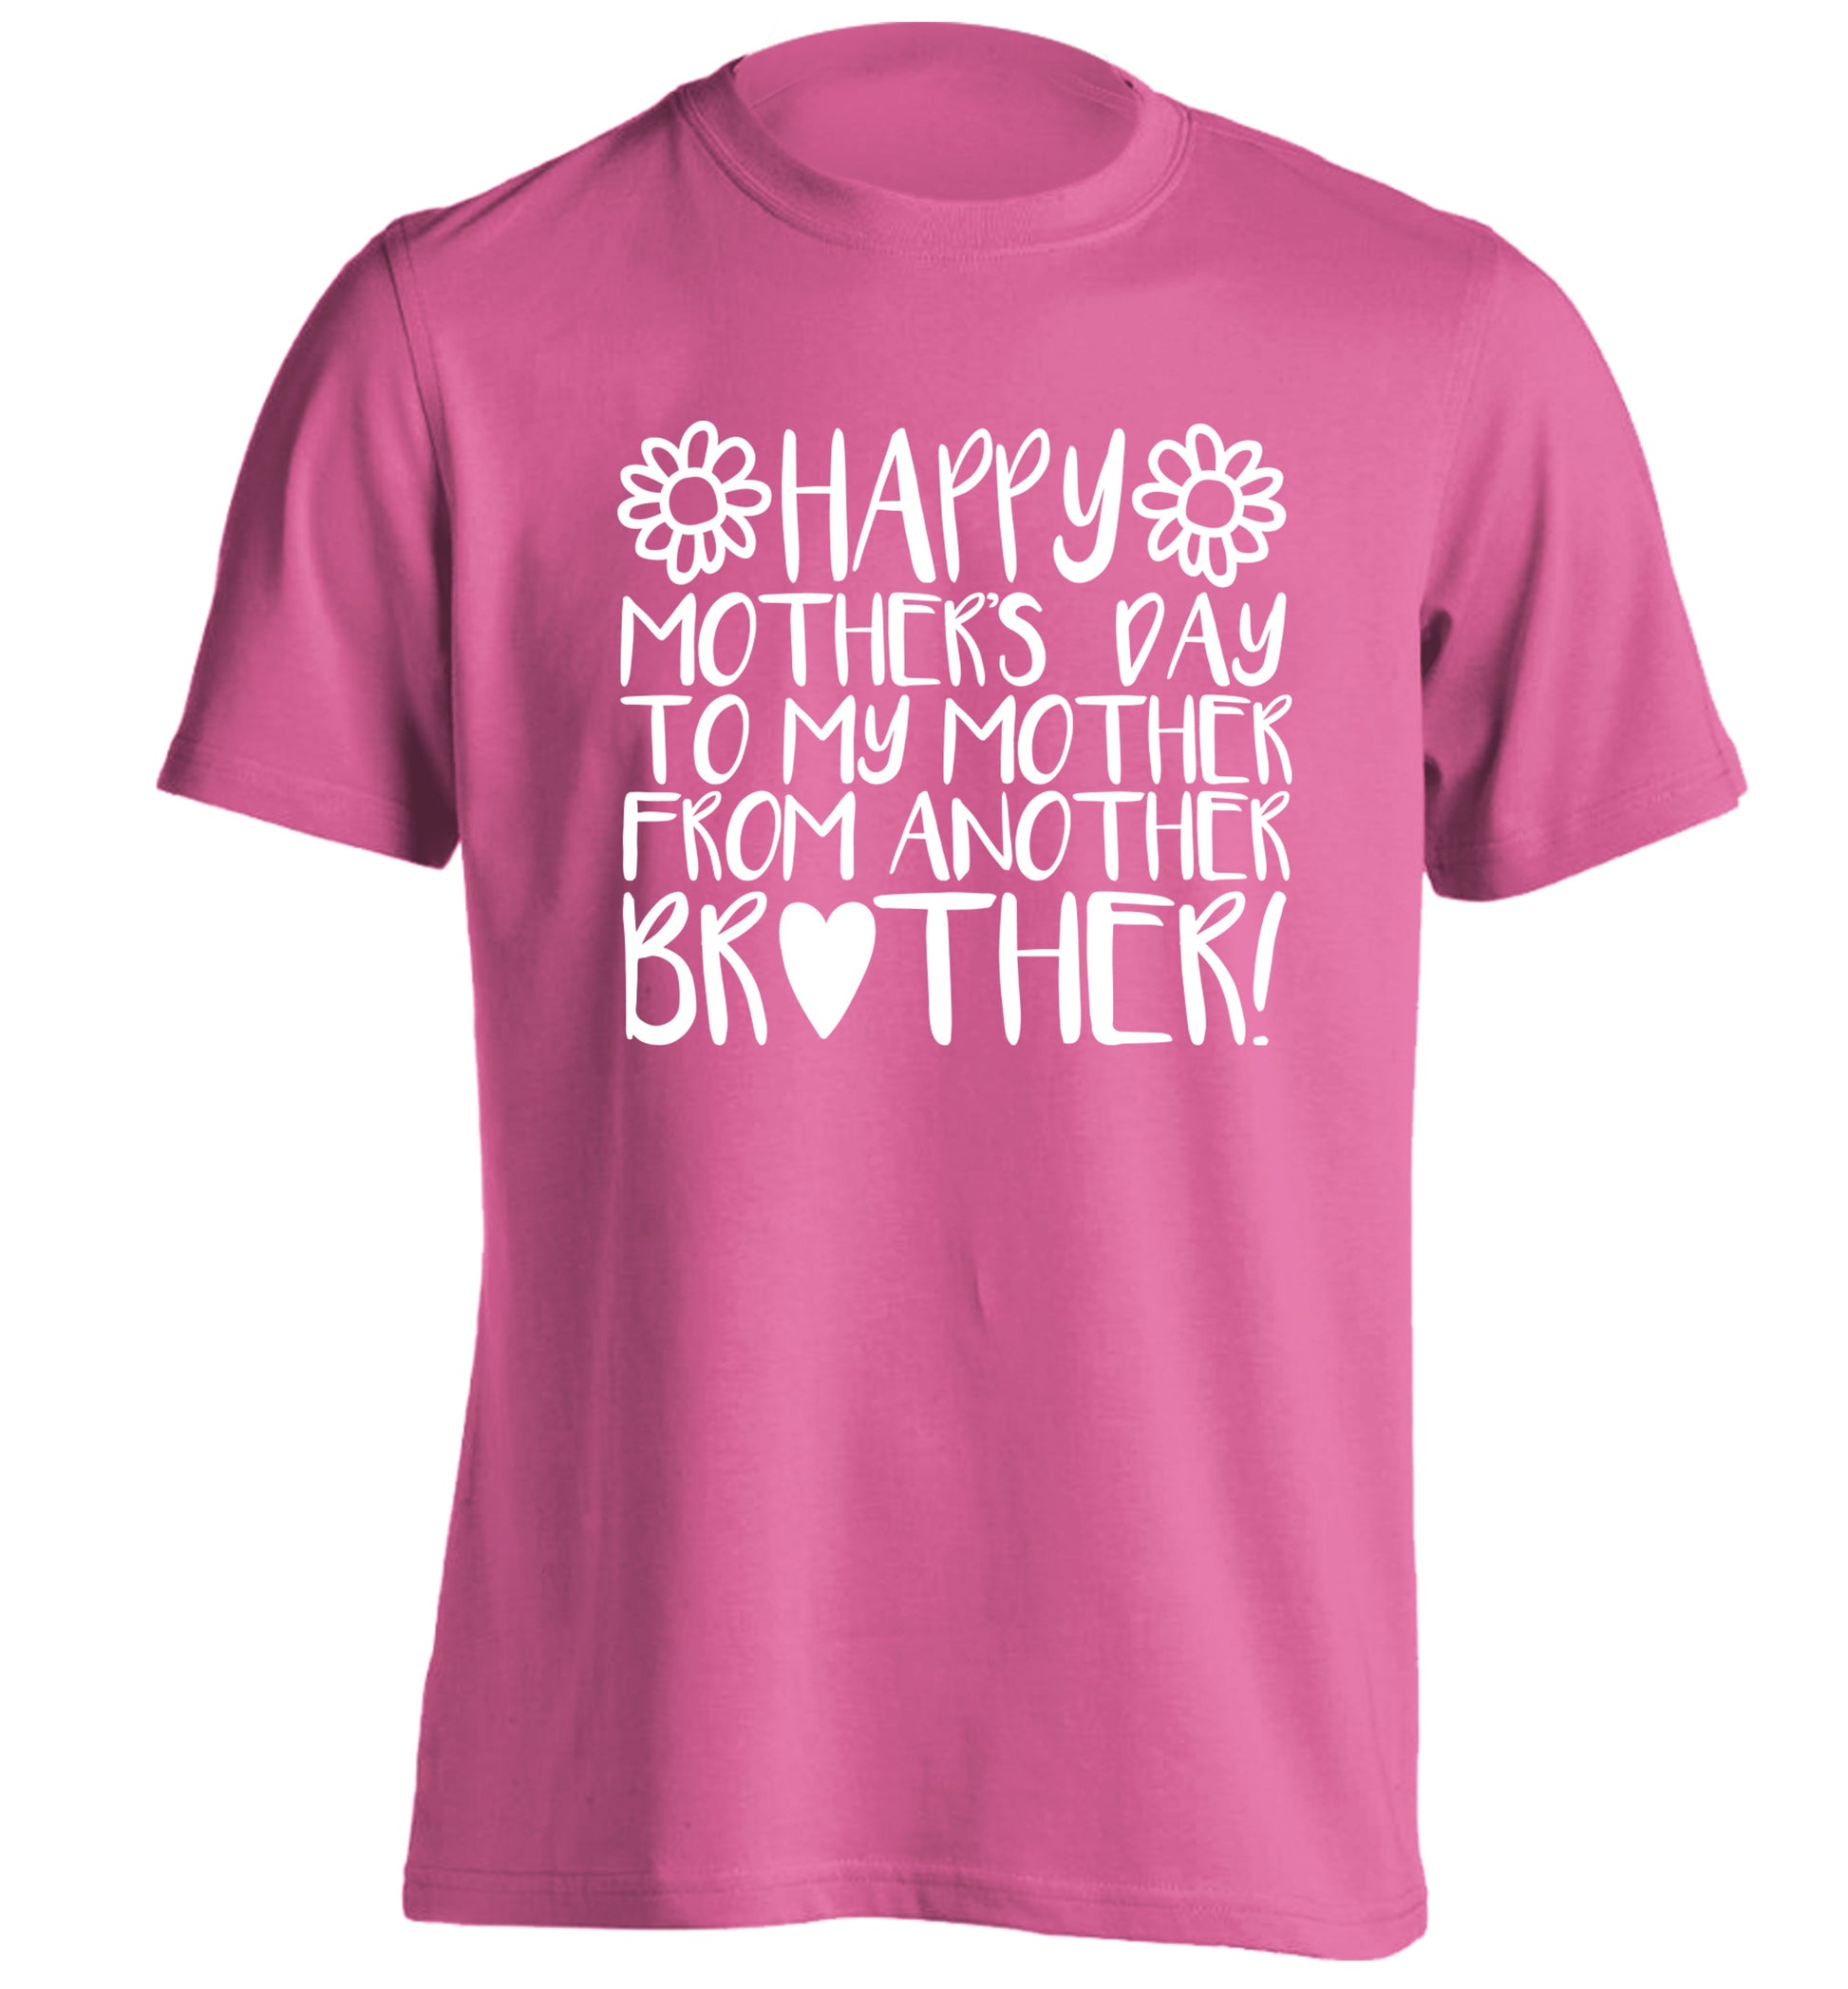 Happy mother's day to my mother from another brother adults unisex pink Tshirt 2XL